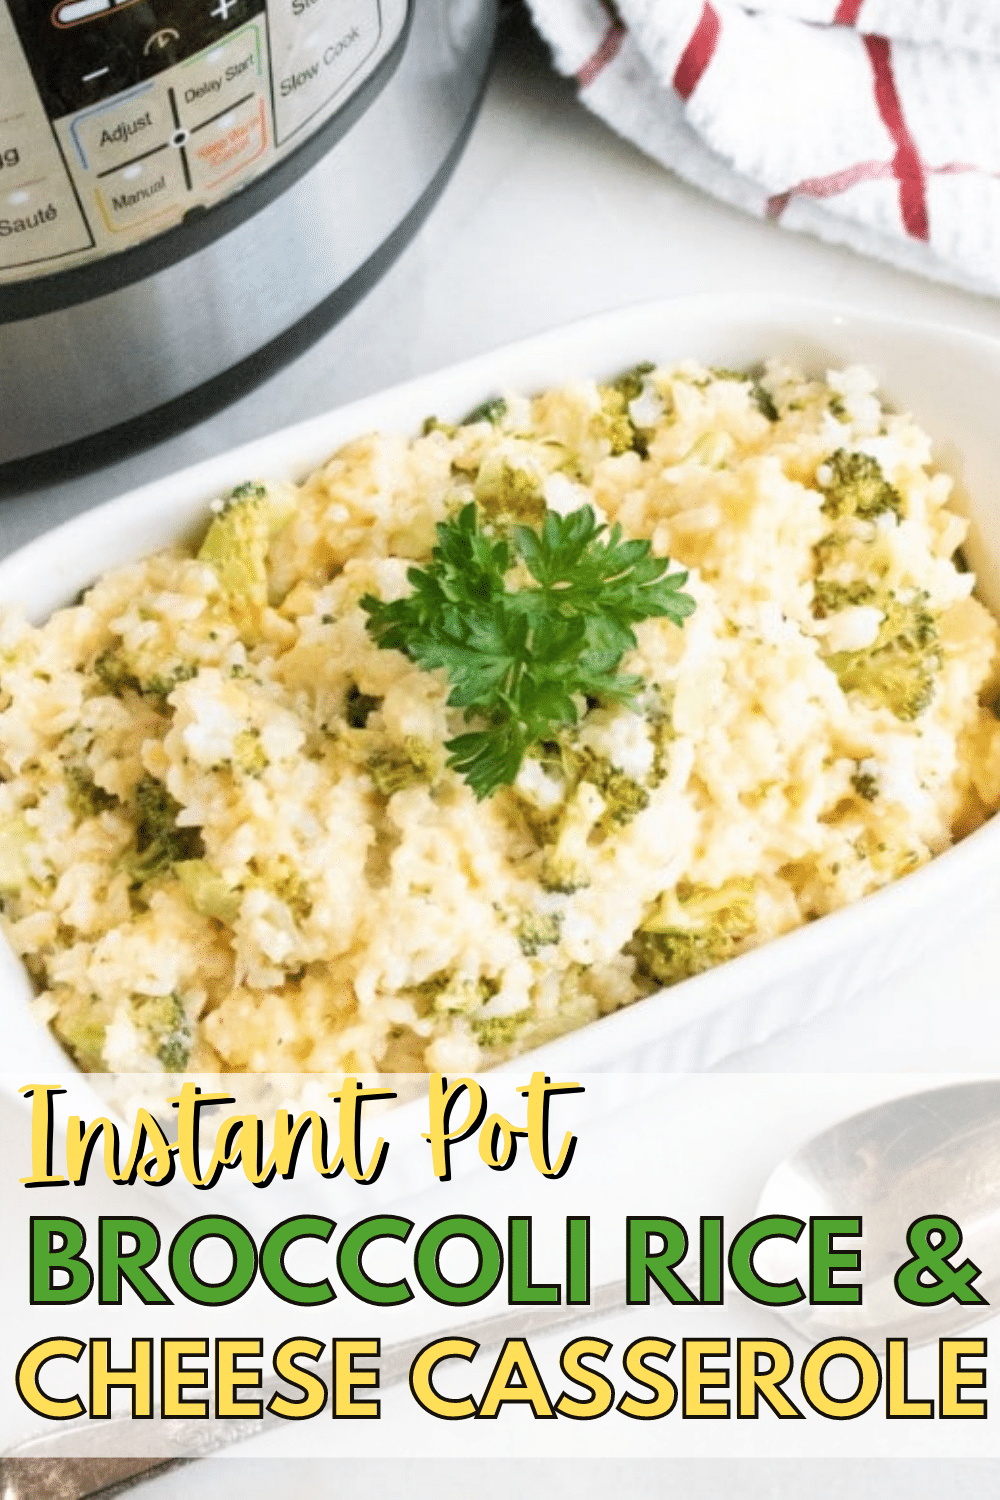 This Instant Pot Broccoli Rice and Cheese Casserole is always a crowd favorite. Super yummy and it's easy to make a huge batch in your Instant Pot. This side dish goes well with almost everything! #sidedish #broccoli #rice #instantpot via @wondermomwannab